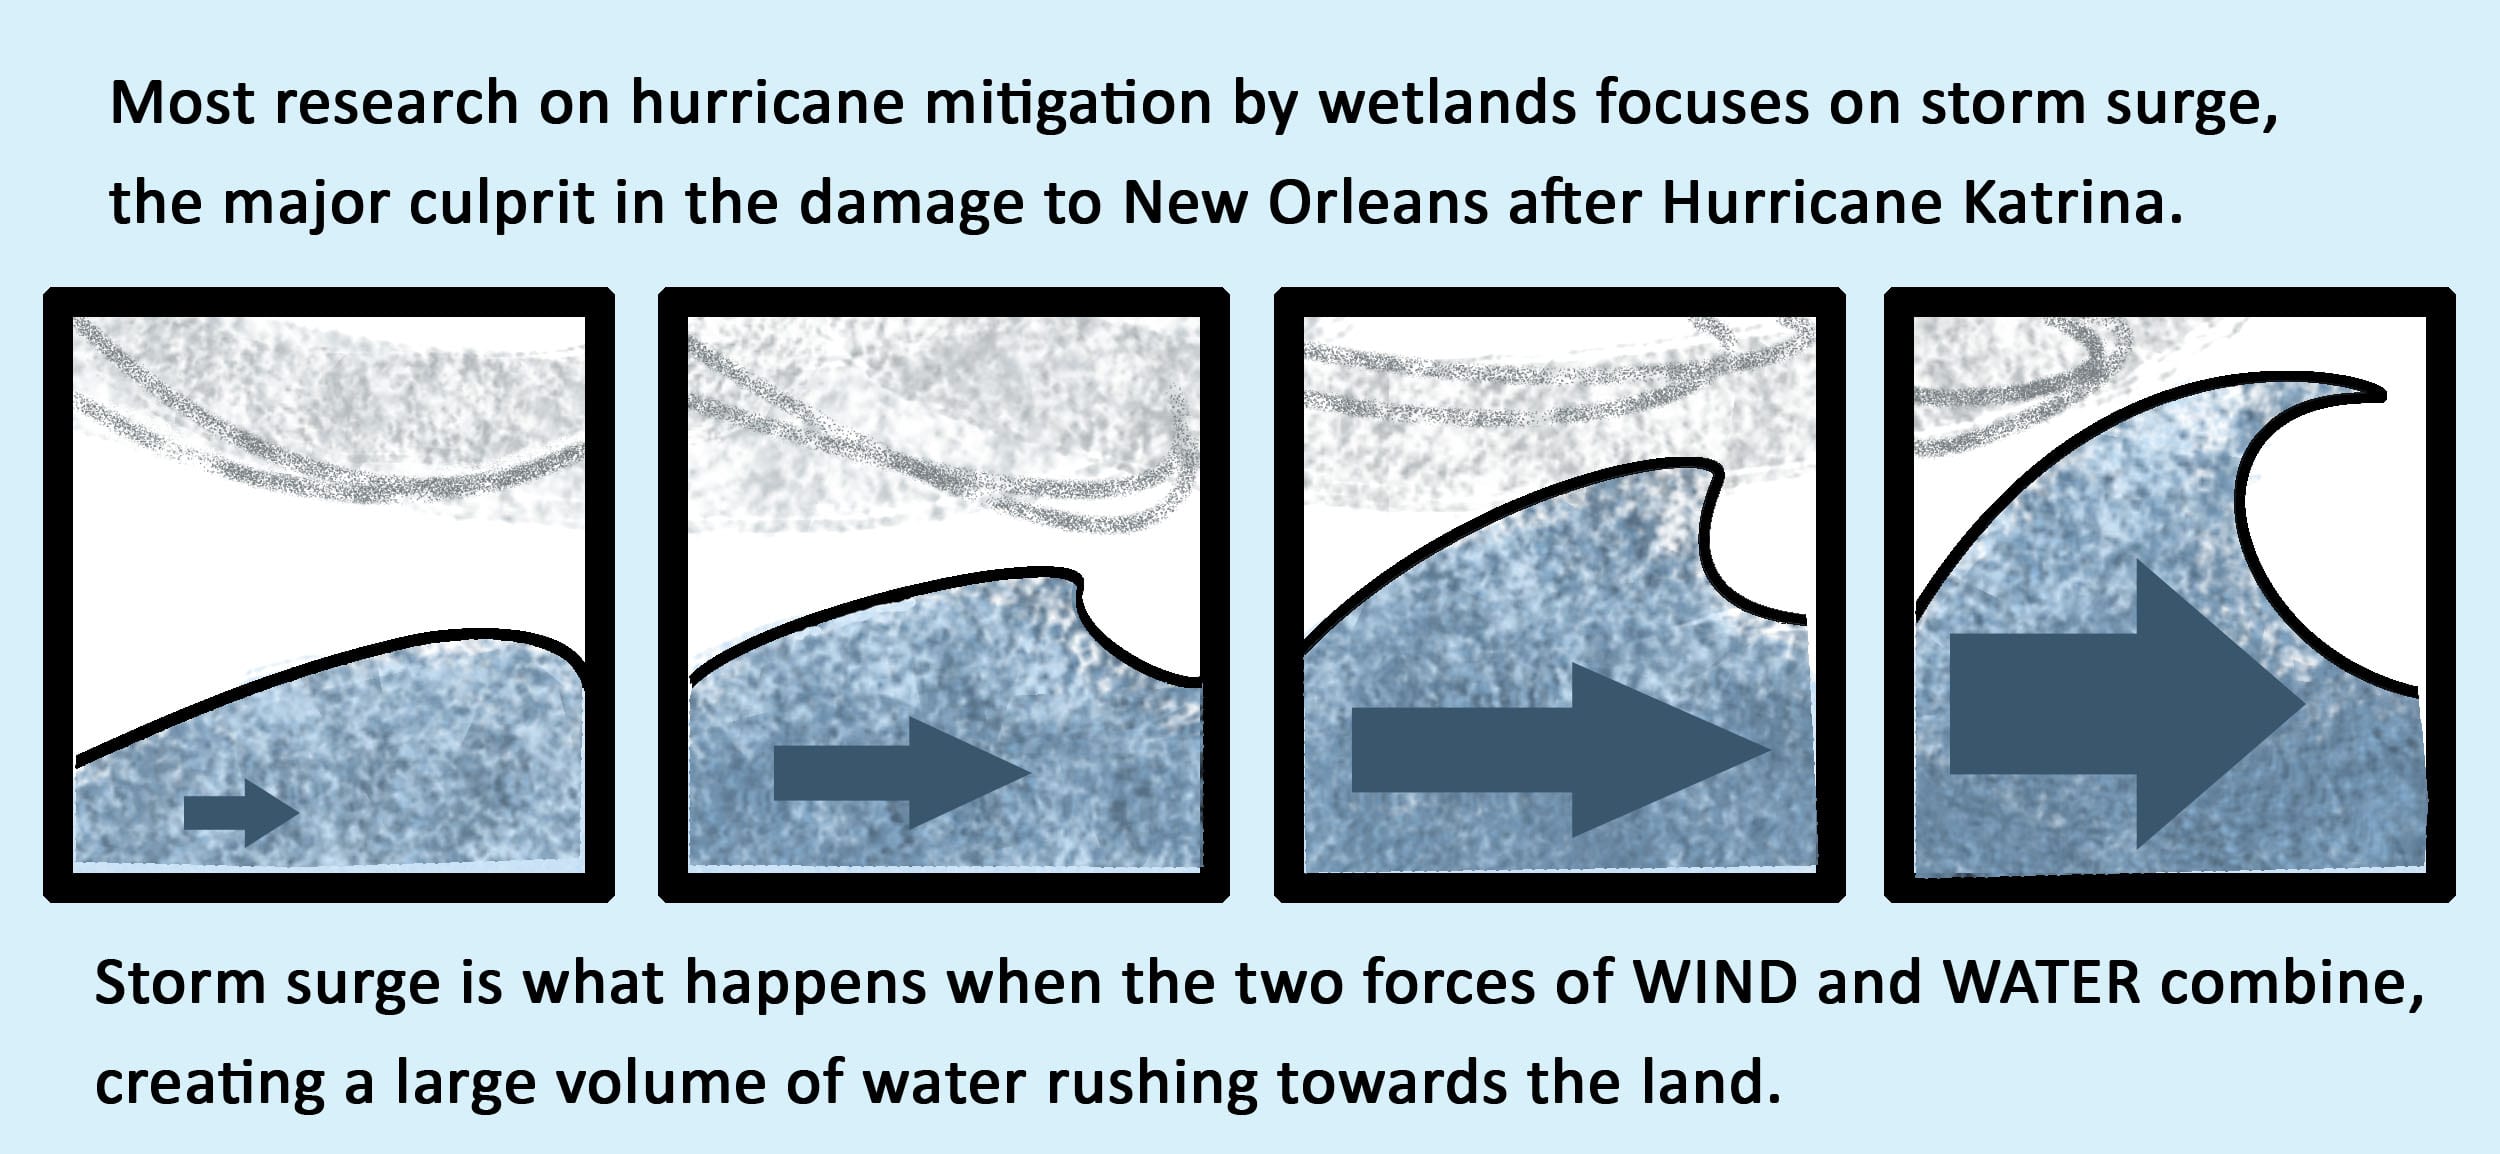 Most research on hurricane mitigation by wetlands focuses on storm surge, the major culprit in the damage to New Orleans after Hurricane Katrina. Storm surge is what happens when the two forces of WIND and WATER combine, creating a large volume of water rushing towards the land.